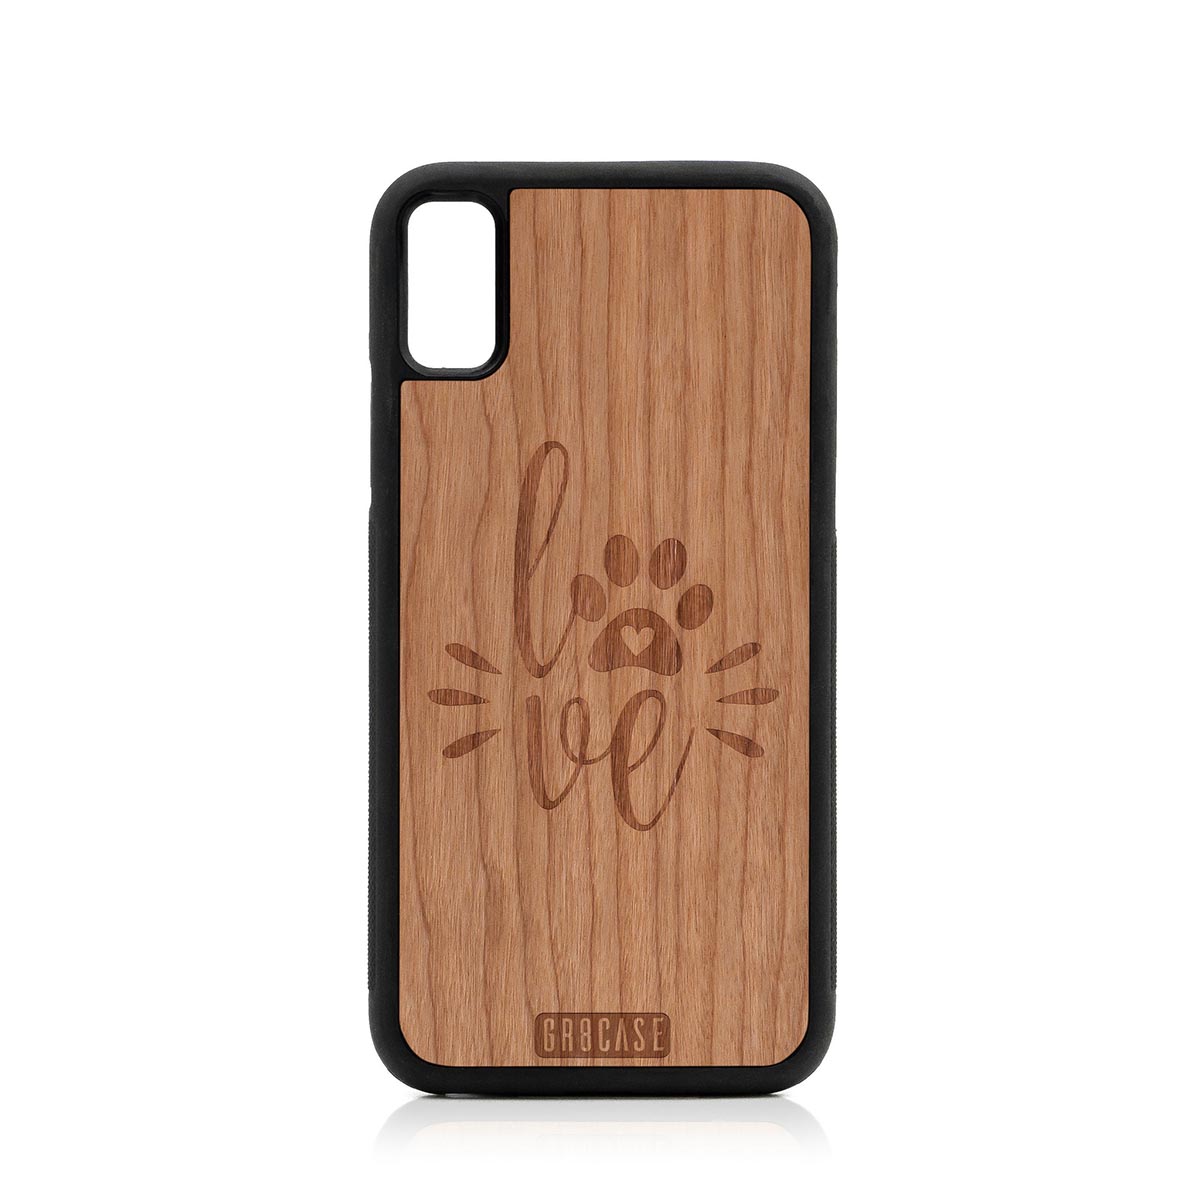 Paw Love Design Wood Case For iPhone XR by GR8CASE